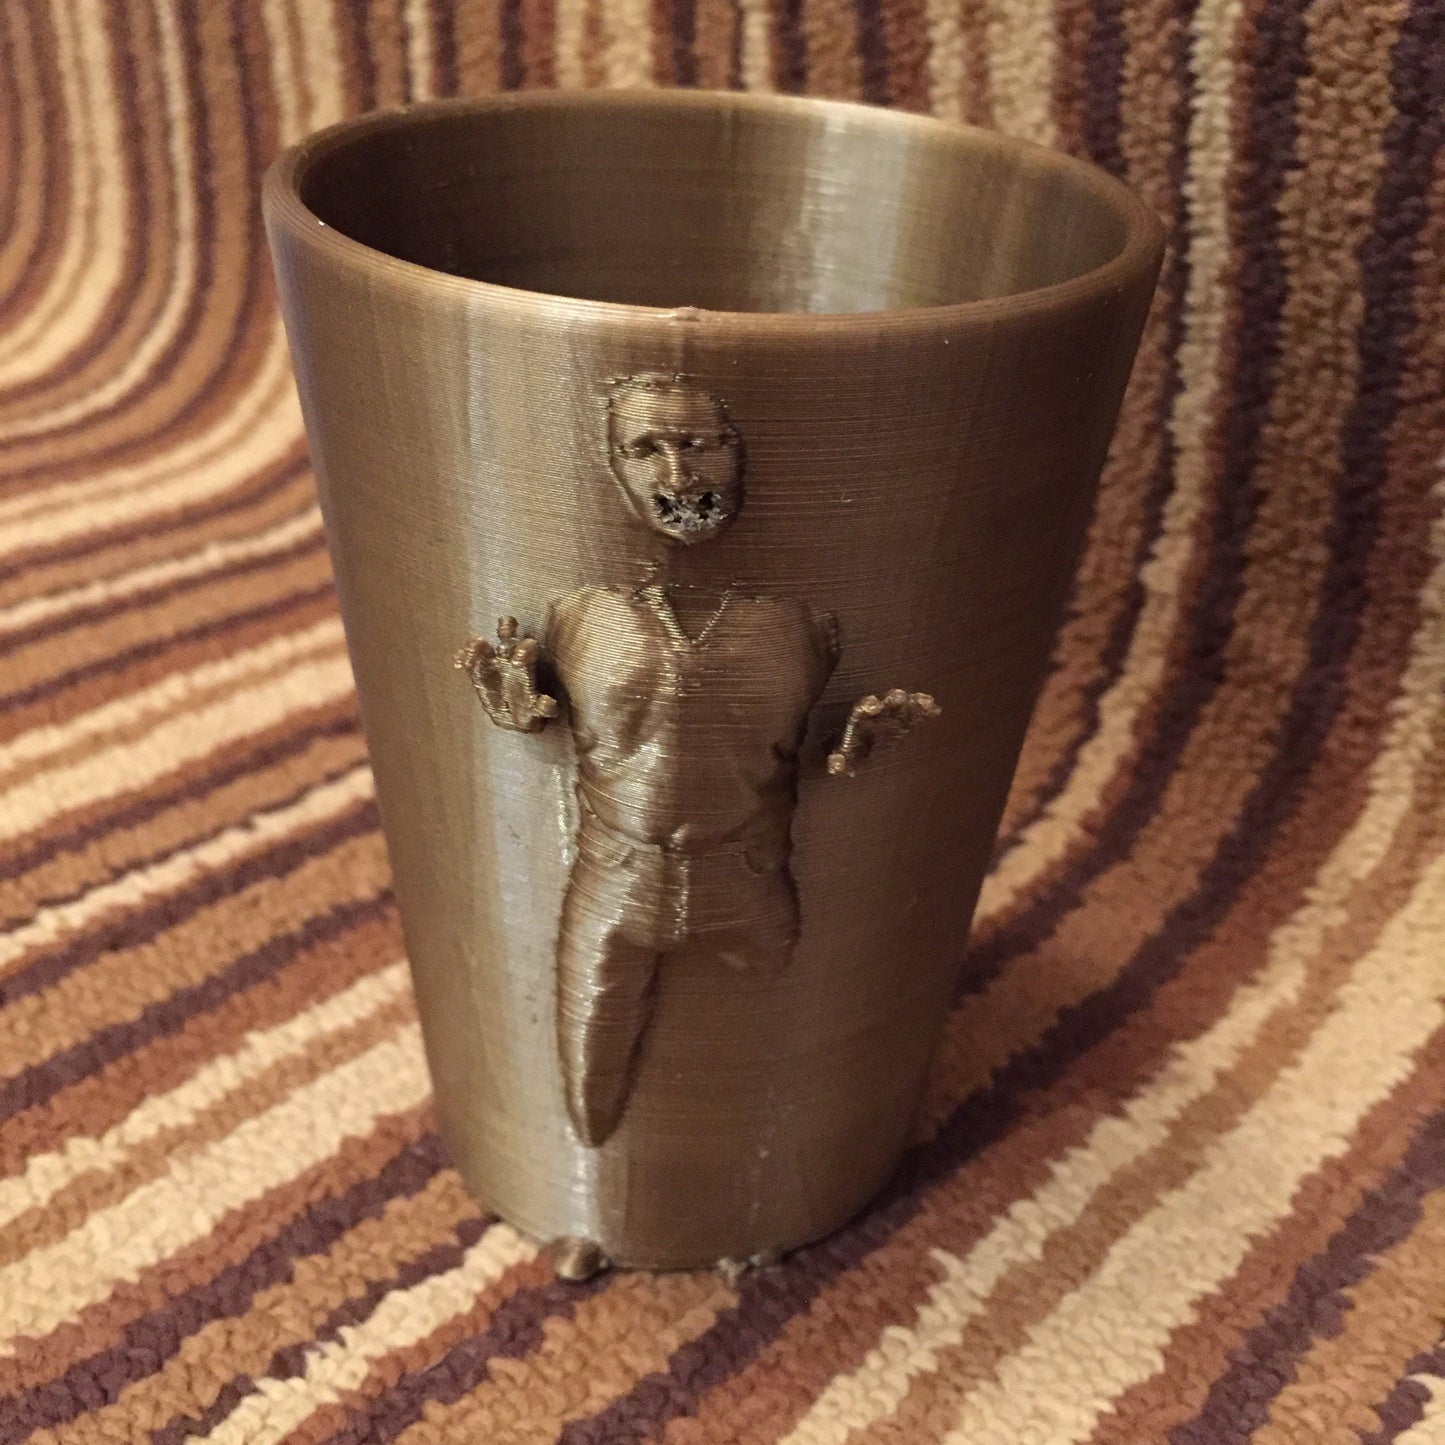 Star Wars Han Solo / Pencil Holder Cup / Planter / Plant Pot / Star Wars Gift